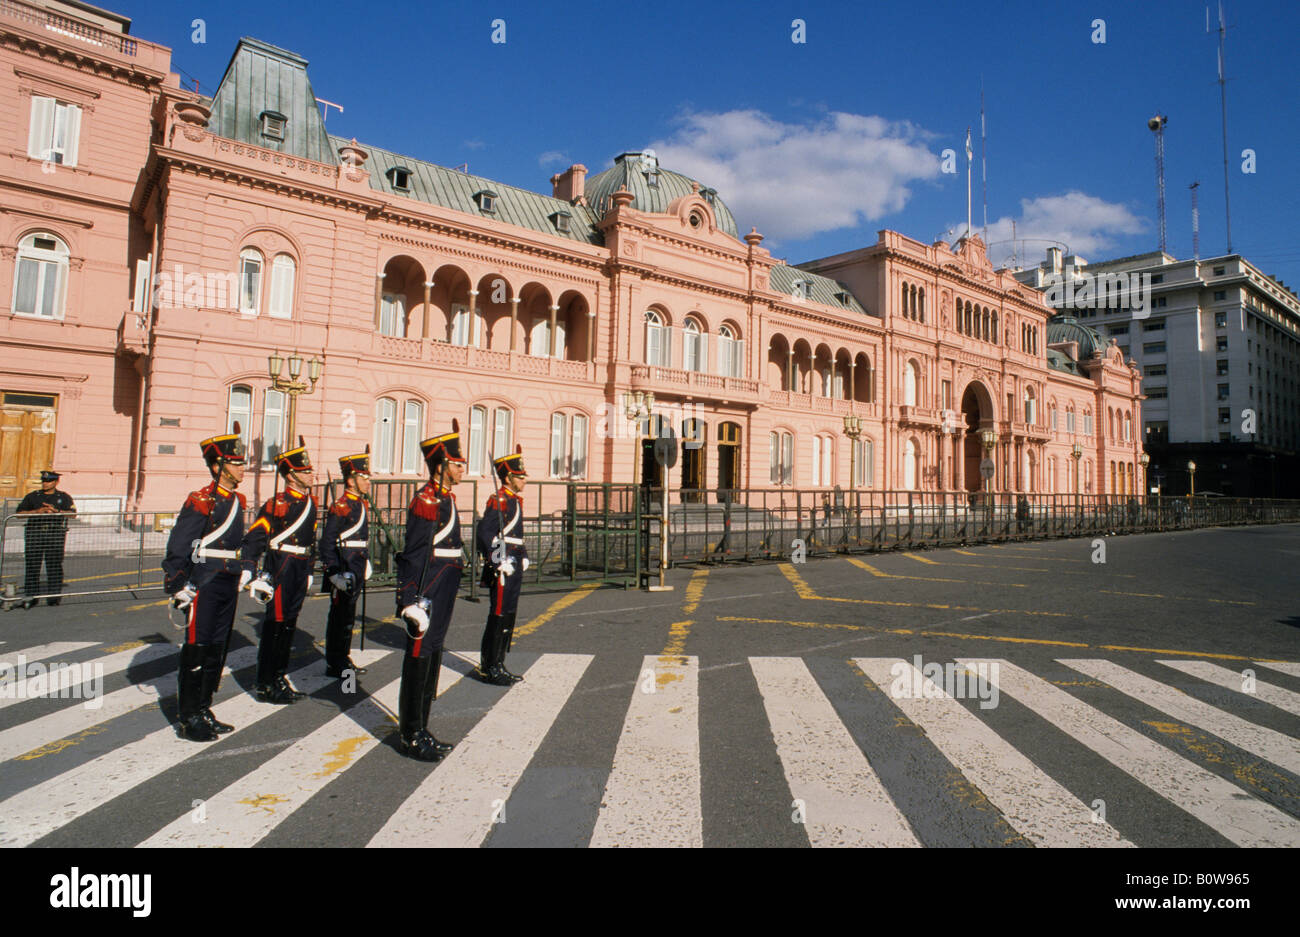 Muster or roll call in front of the Argentinean seat of government, Casa Rosada, Plaza de Mayo, Buenos Aires, Argentina Stock Photo